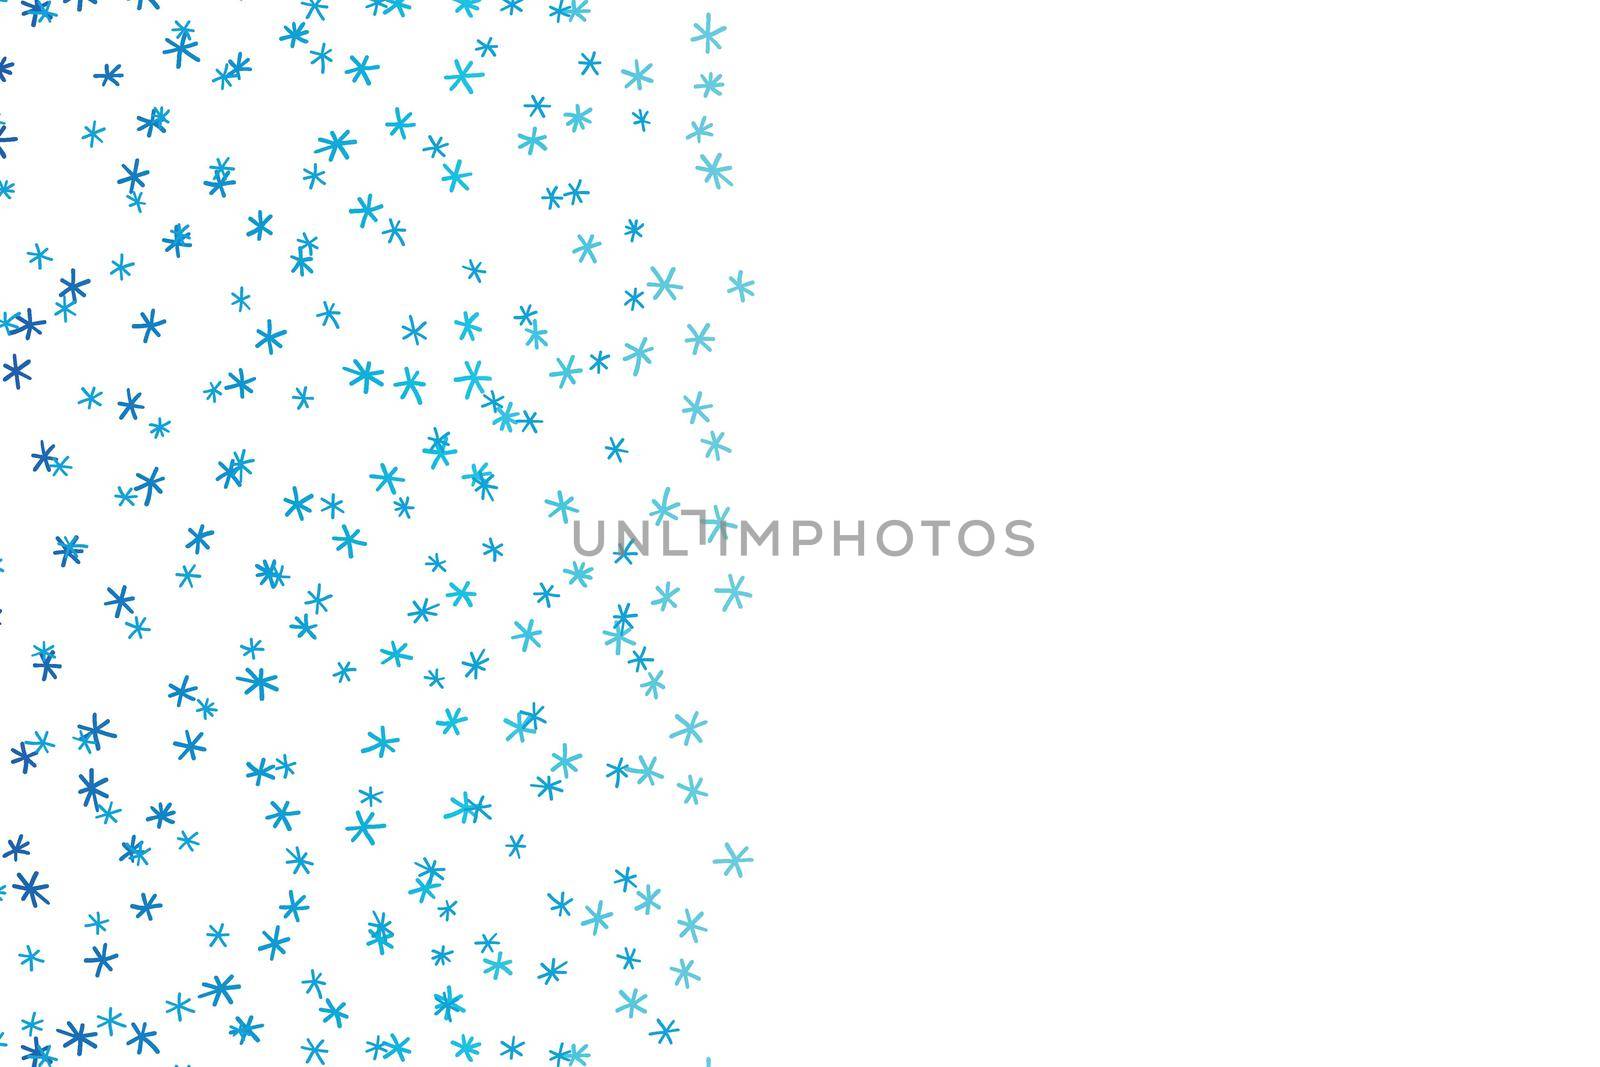 Christmas card with blue snowflakes on white background. Isolated snowflakes icon. Empty paper shape. Winter cartoon flat illustration. Copy space. Holiday pattern, banner, frame, greeting card desig by allaku